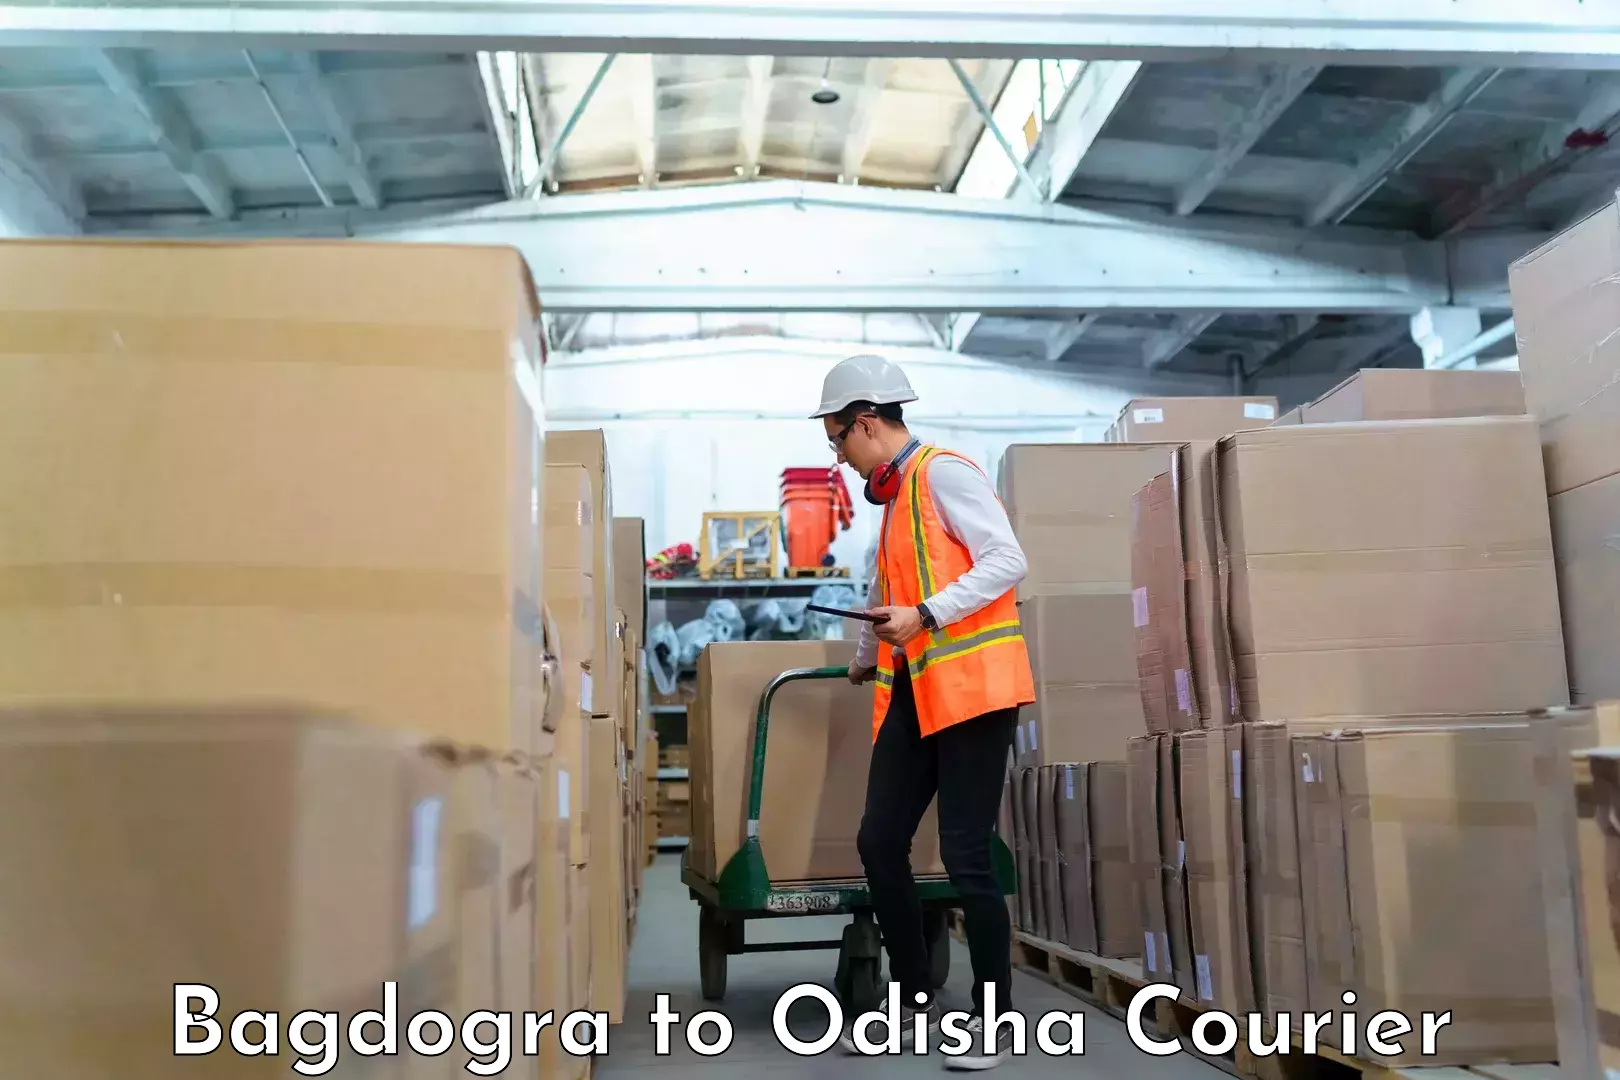 Baggage delivery scheduling Bagdogra to Odisha